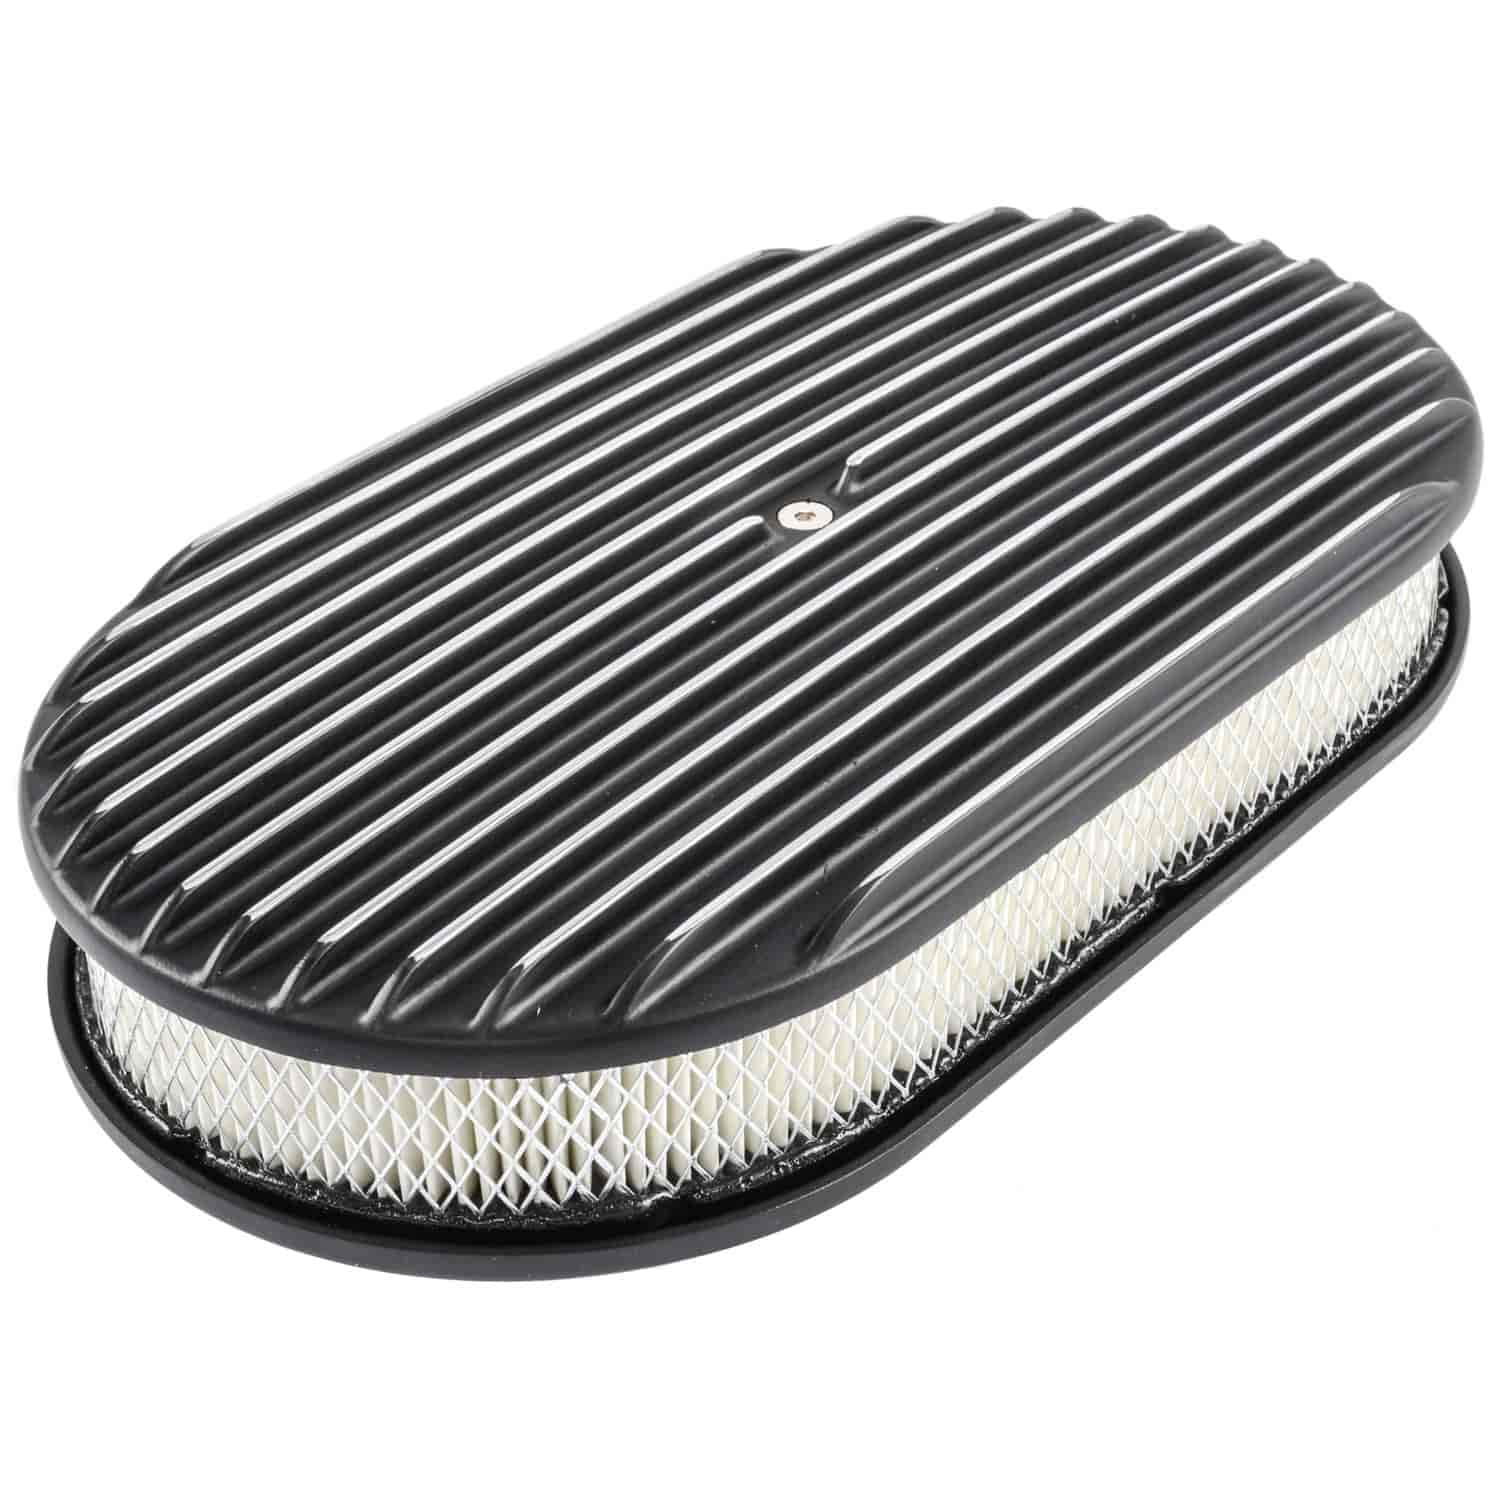 12 Oval Fully Polished Aluminum Finned Air Cleaner For 5-1/8” Carb Holley